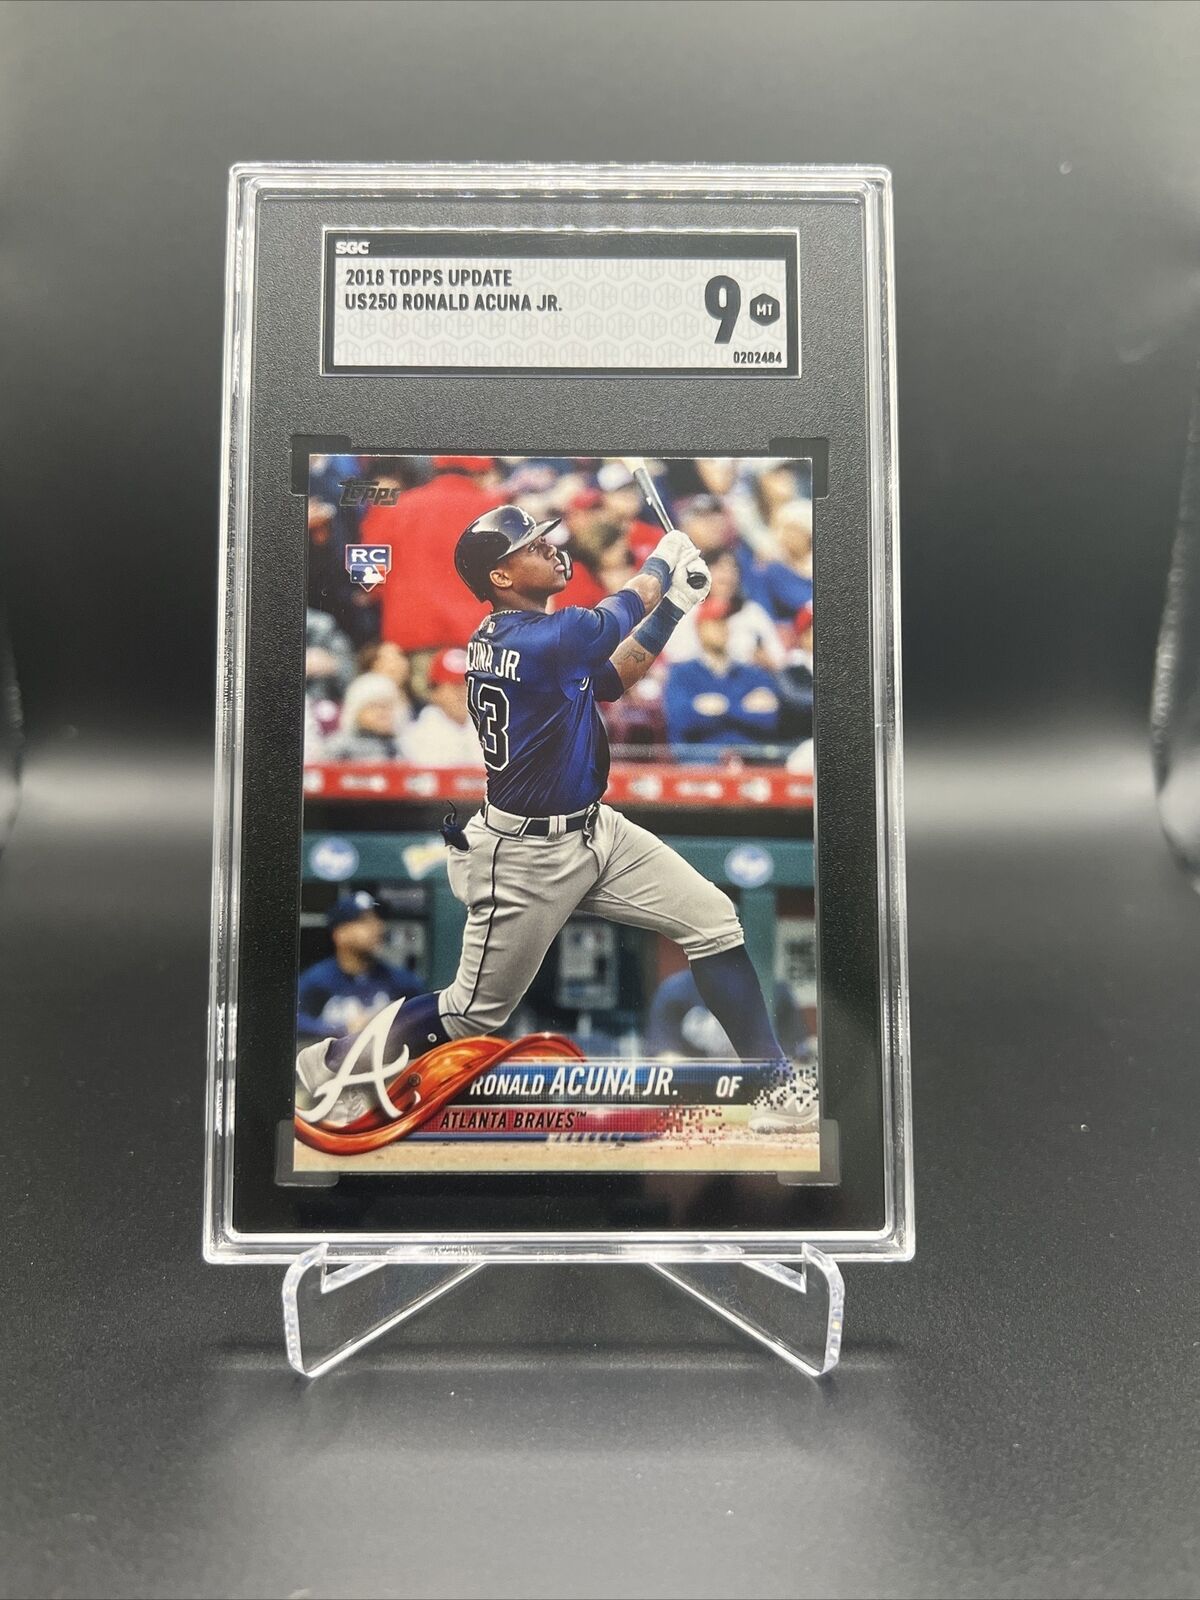 2018 Topps Update #US250 Ronald Acuna Jr. Braves RC Rookie SGC 9 MINT